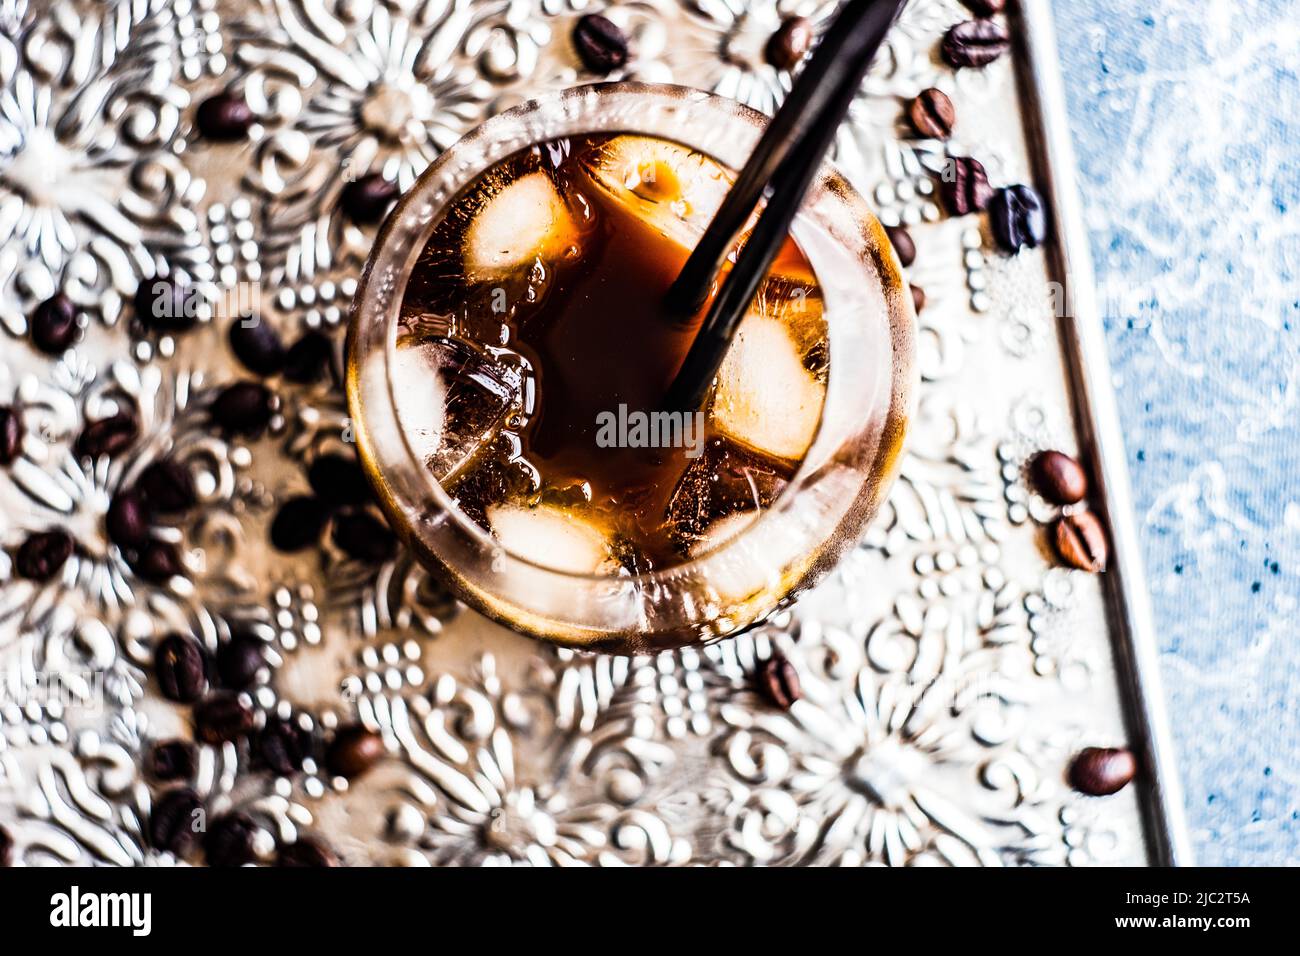 Close-up of an iced coffee drink on metal tray with roasted coffee beans Stock Photo